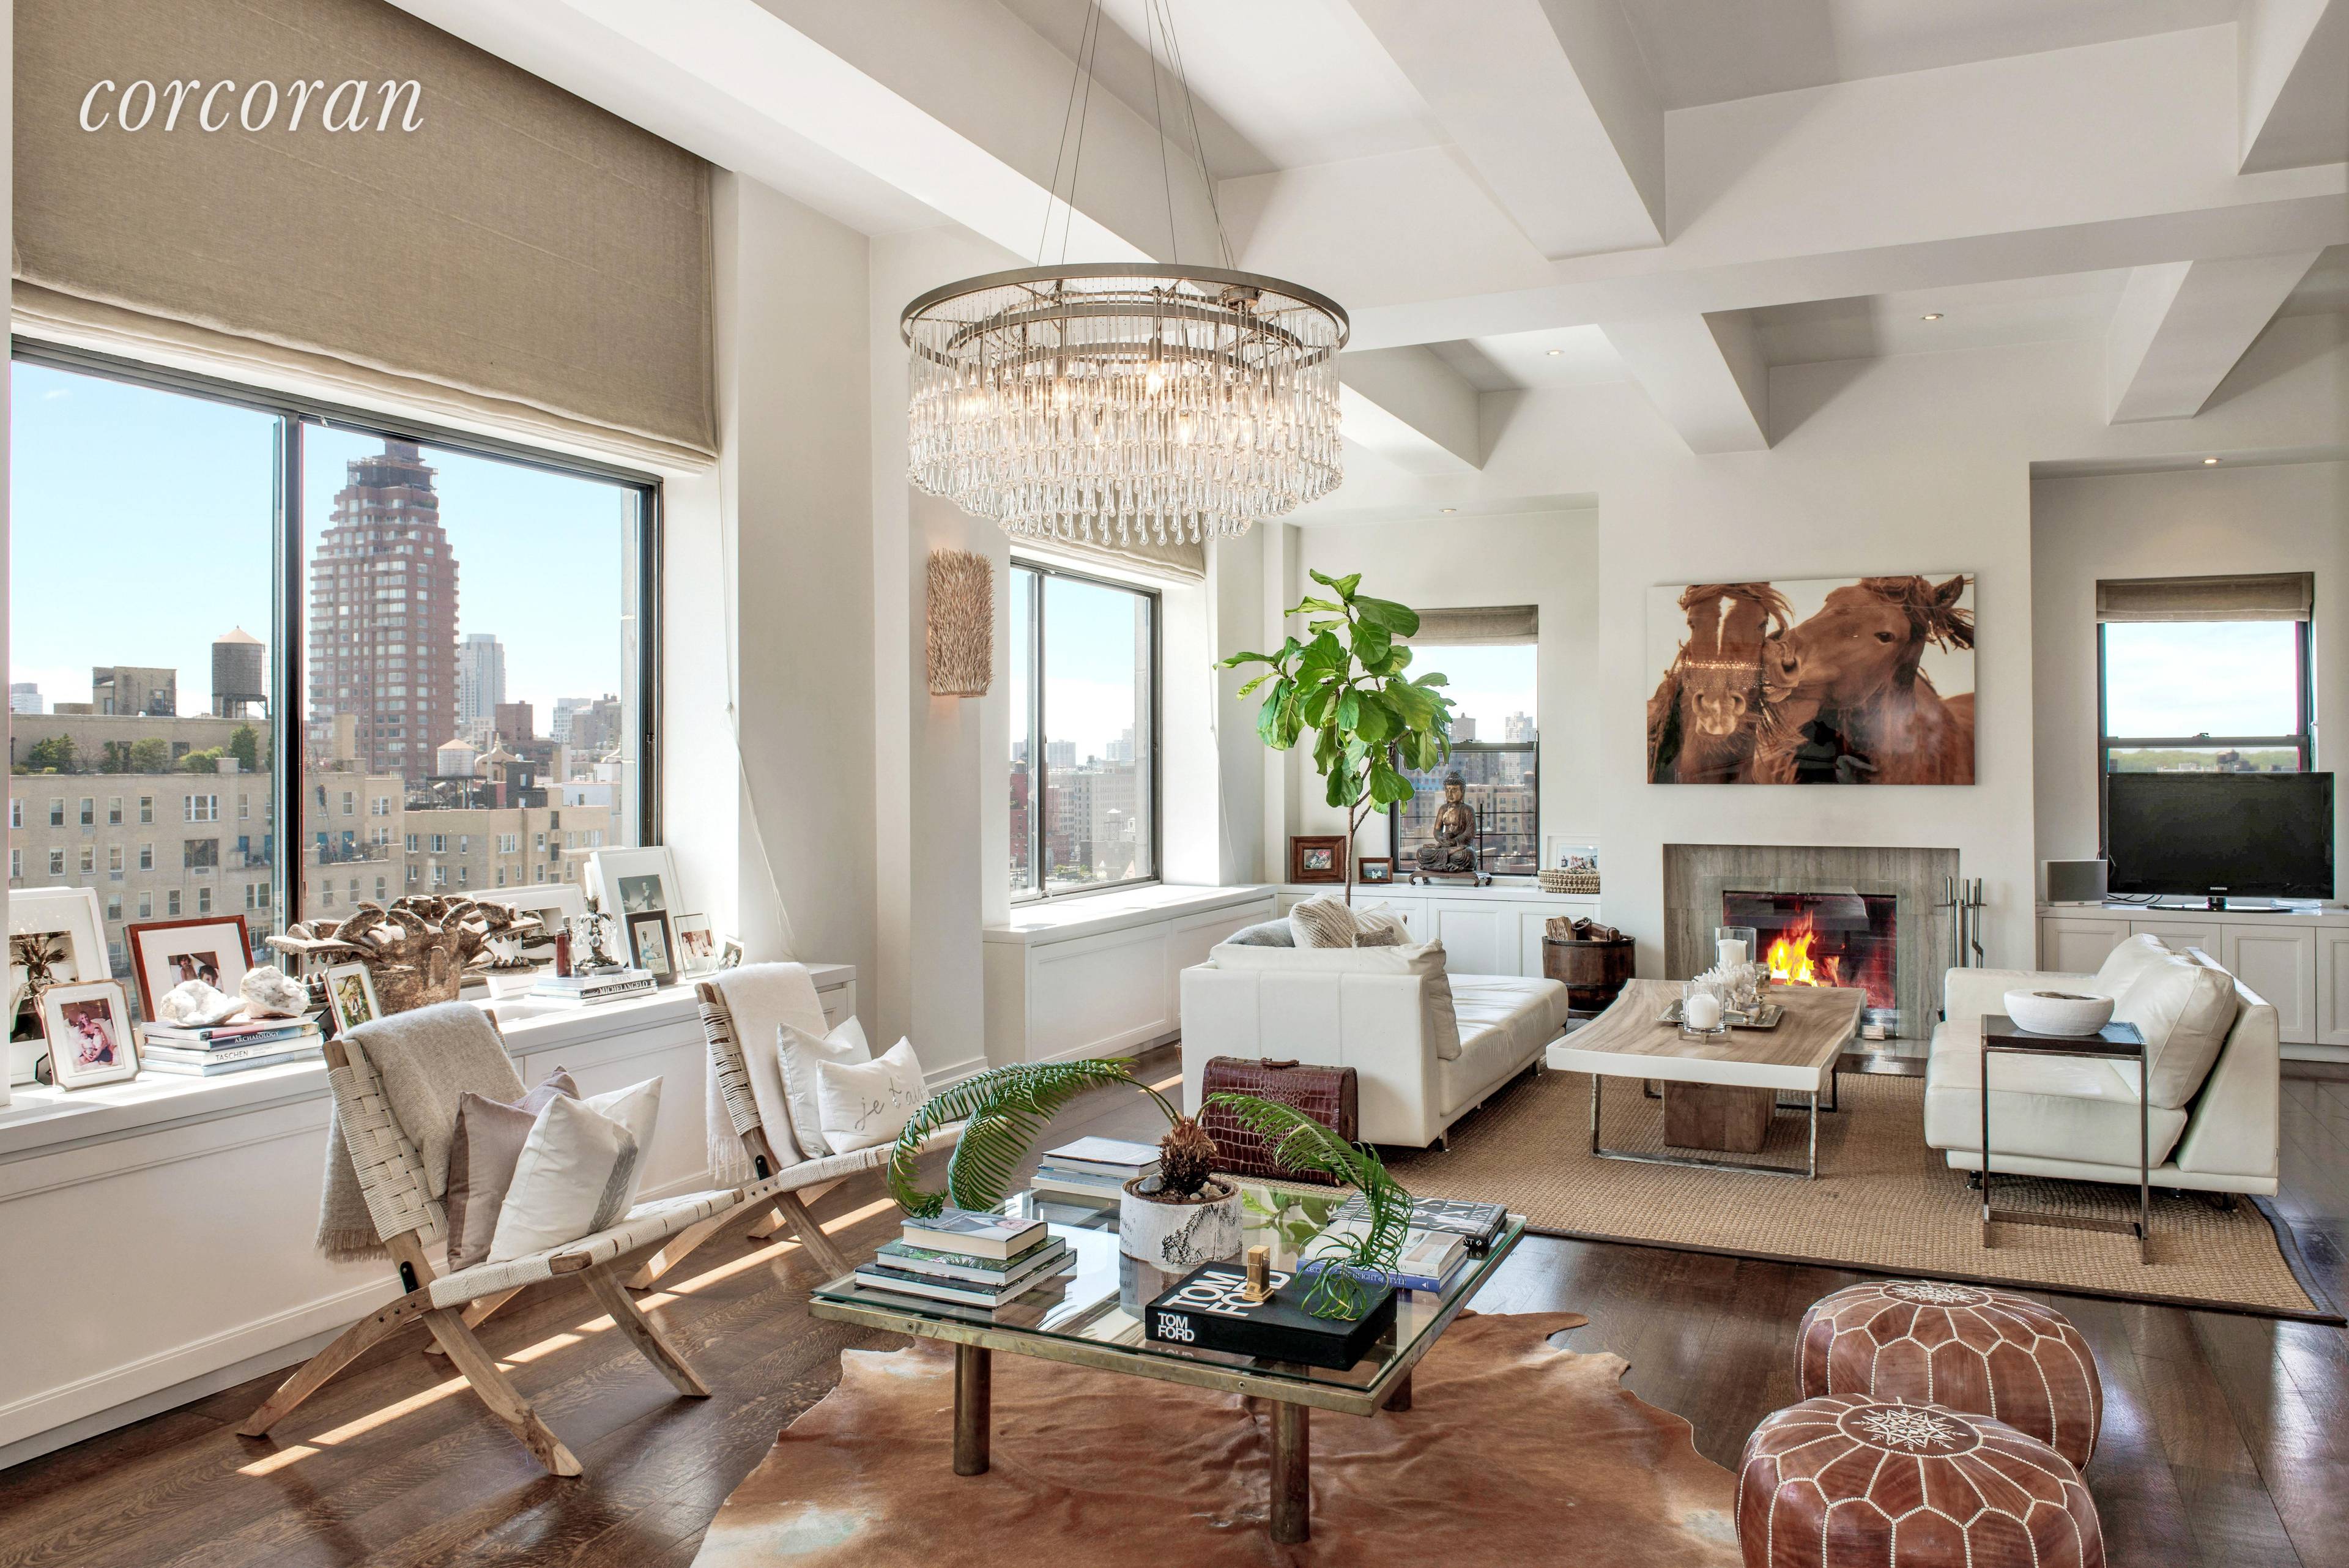 This spectacular loft like three bedroom corner duplex home has soaring 11 foot ceilings and six massive south facing picture windows with views of Central Park from every window.